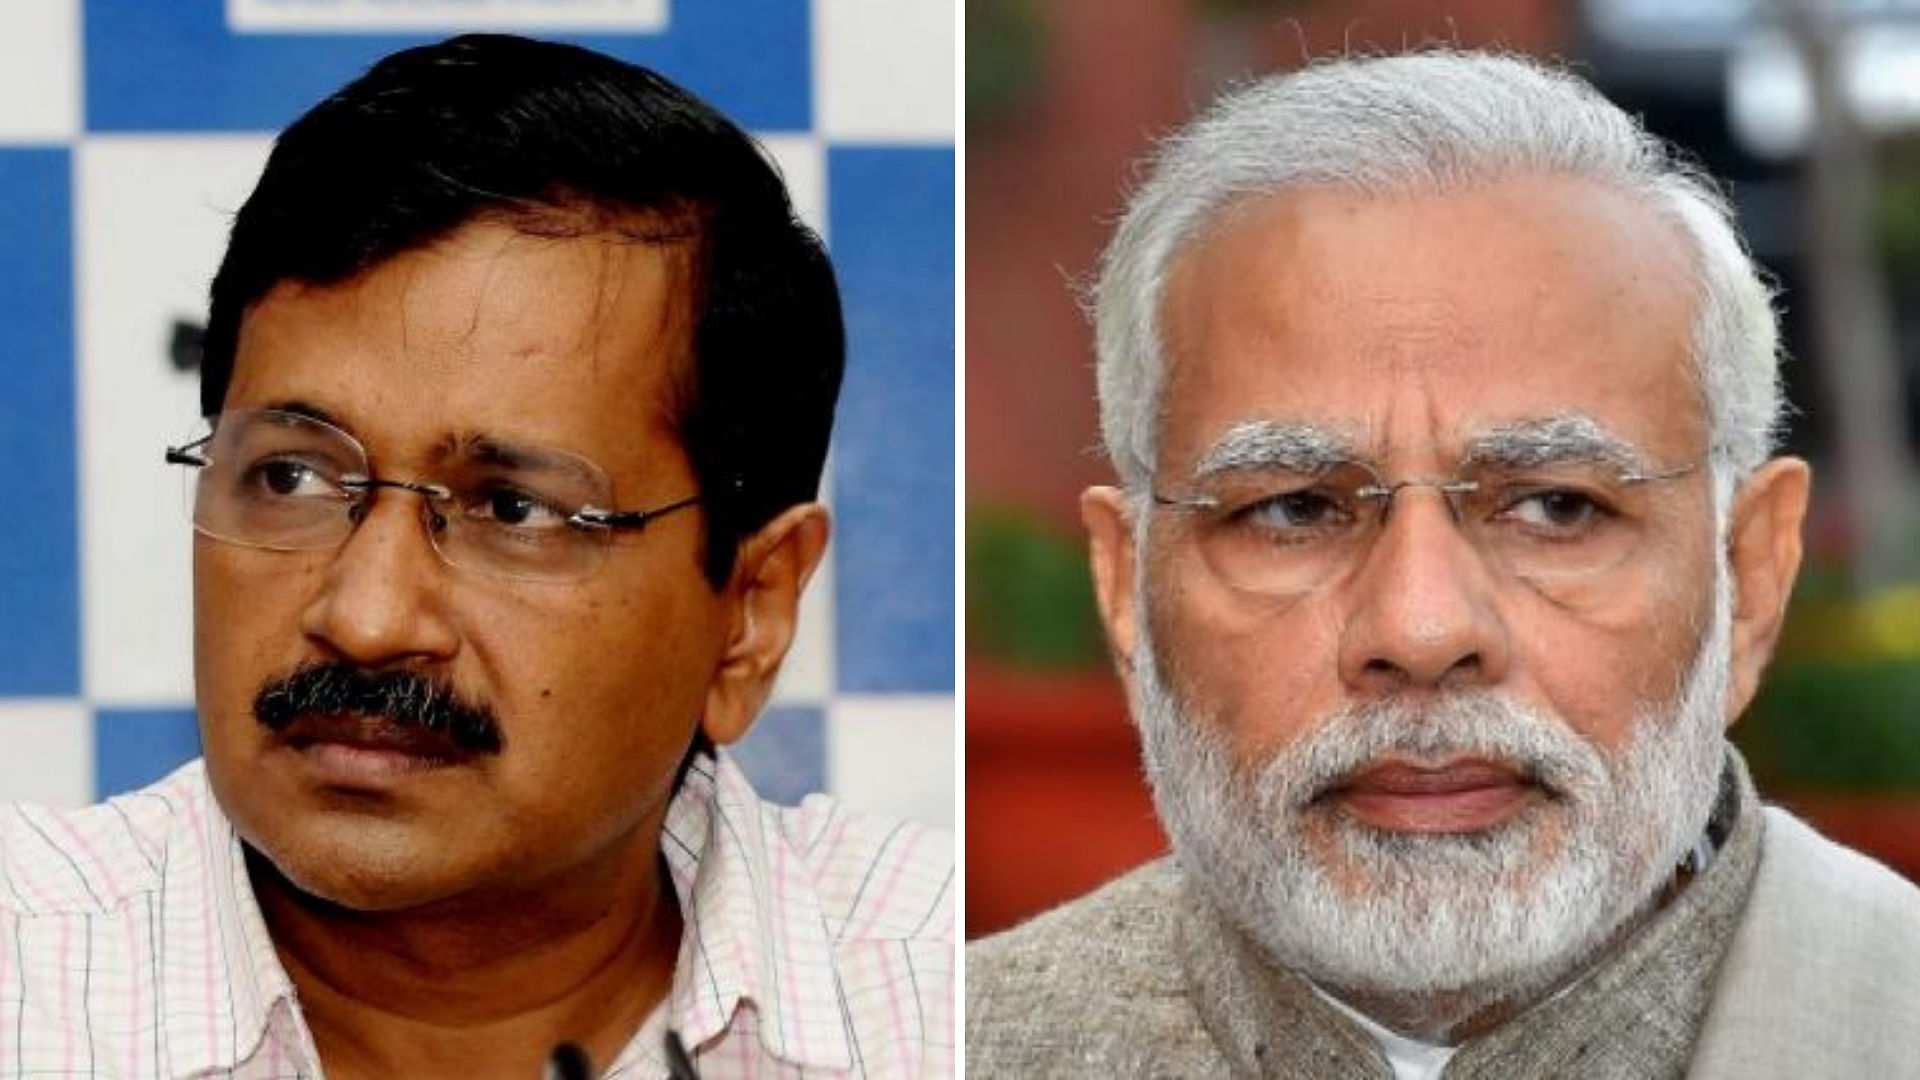 AAP Chief and Delhi CM Arvind Kejriwal on Wednesday, 13 February took a jibe at Prime Minister Narendra Modi’s educational qualifications.